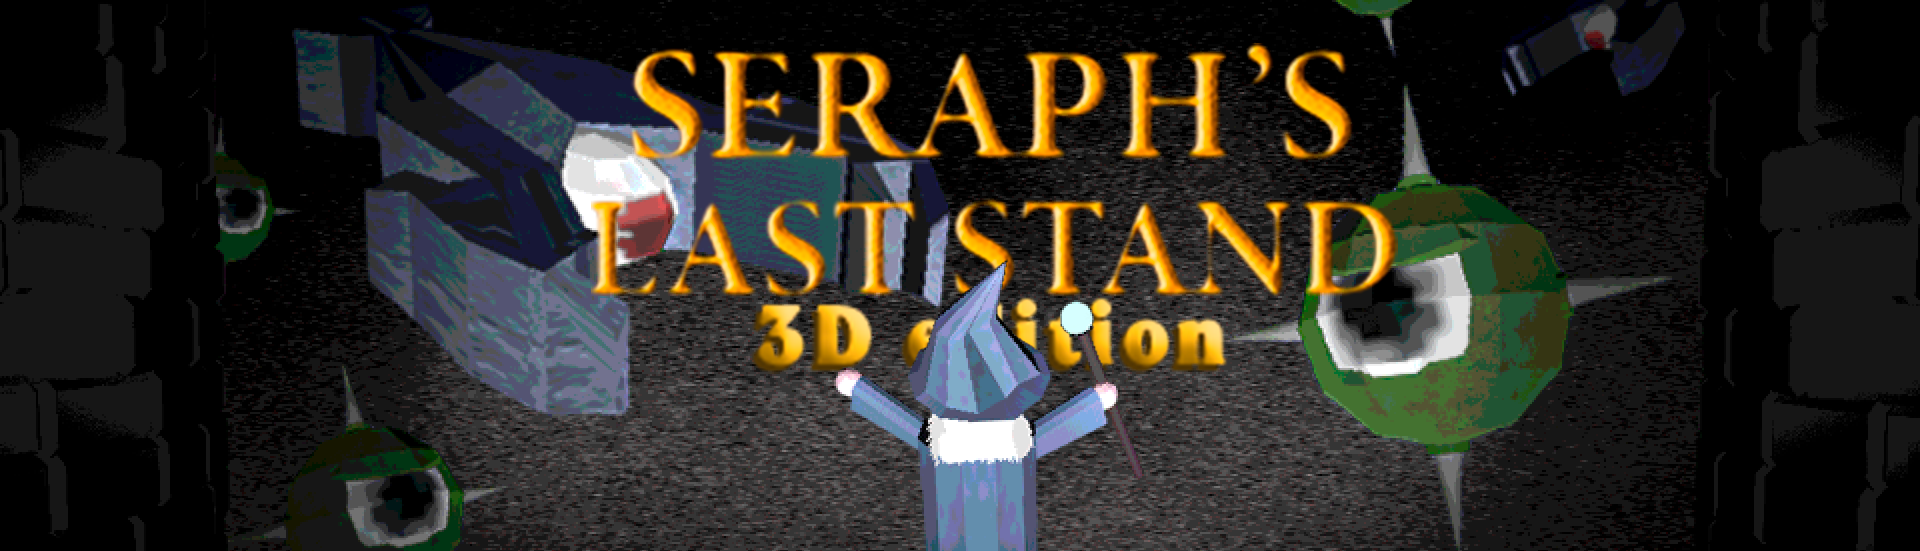 Seraph's Last Stand 3D Edition